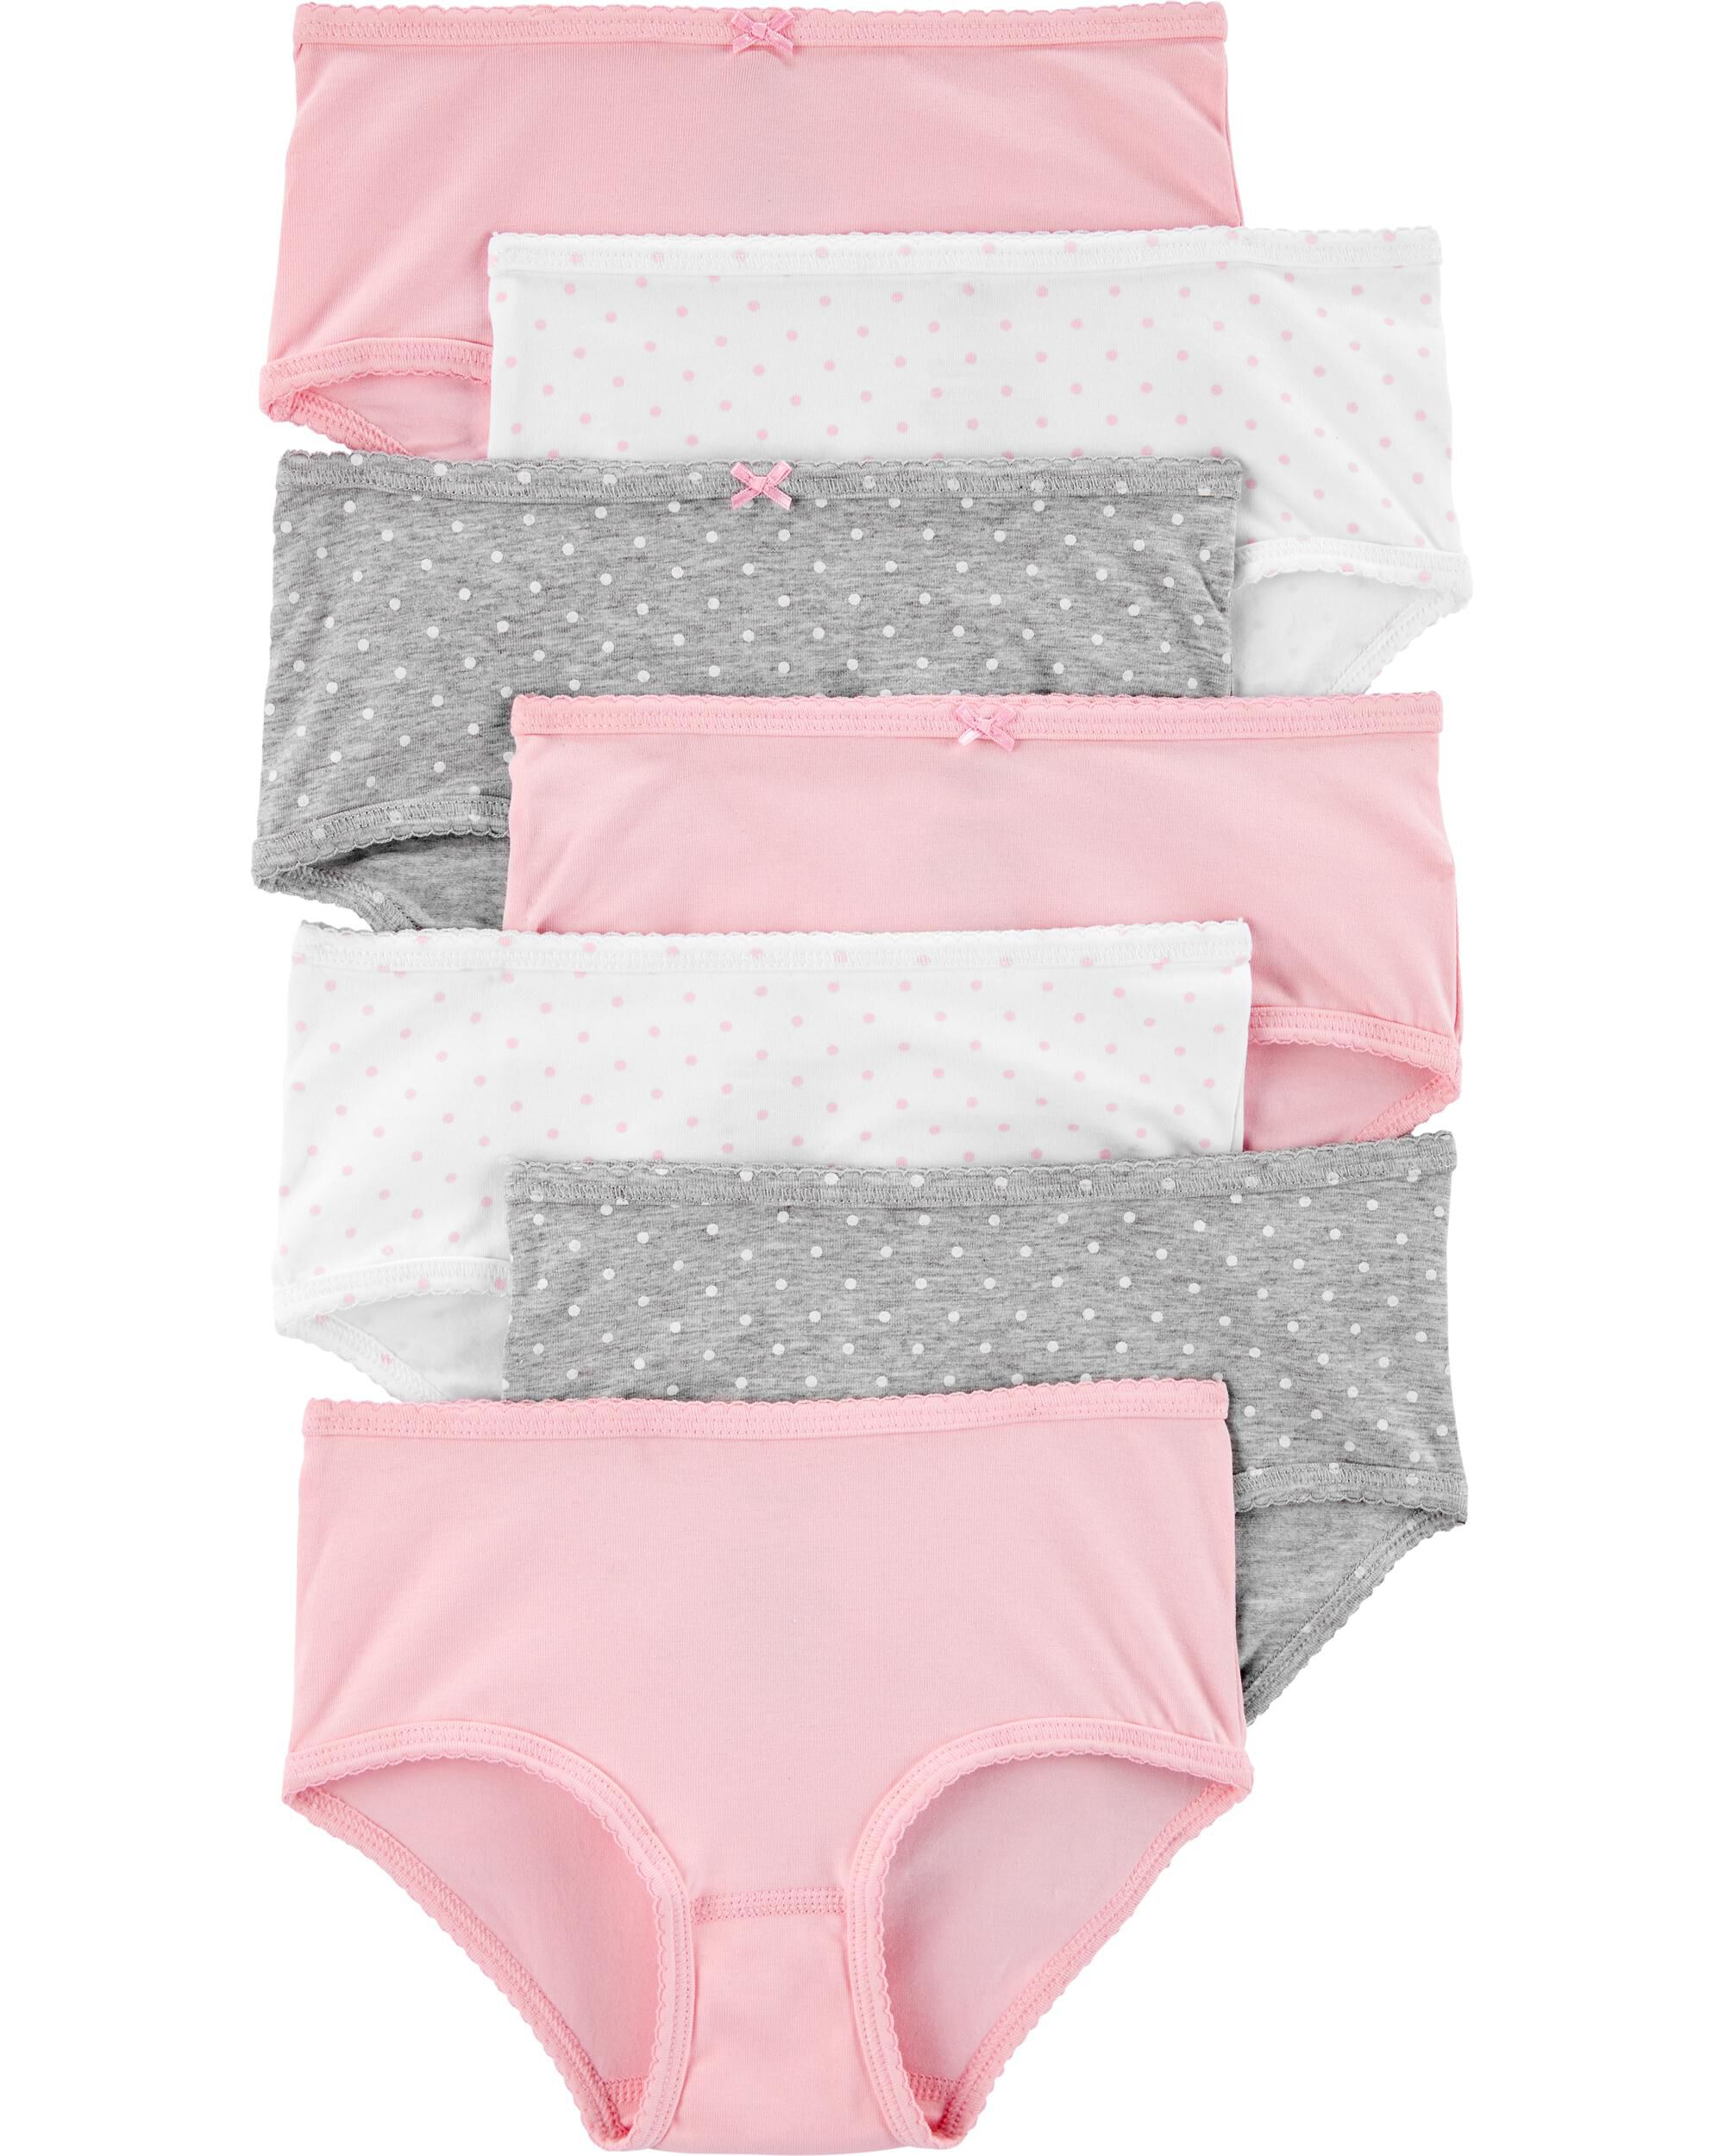 Simple Joys by Carters Baby Girls Toddler 8-Pack Underwear